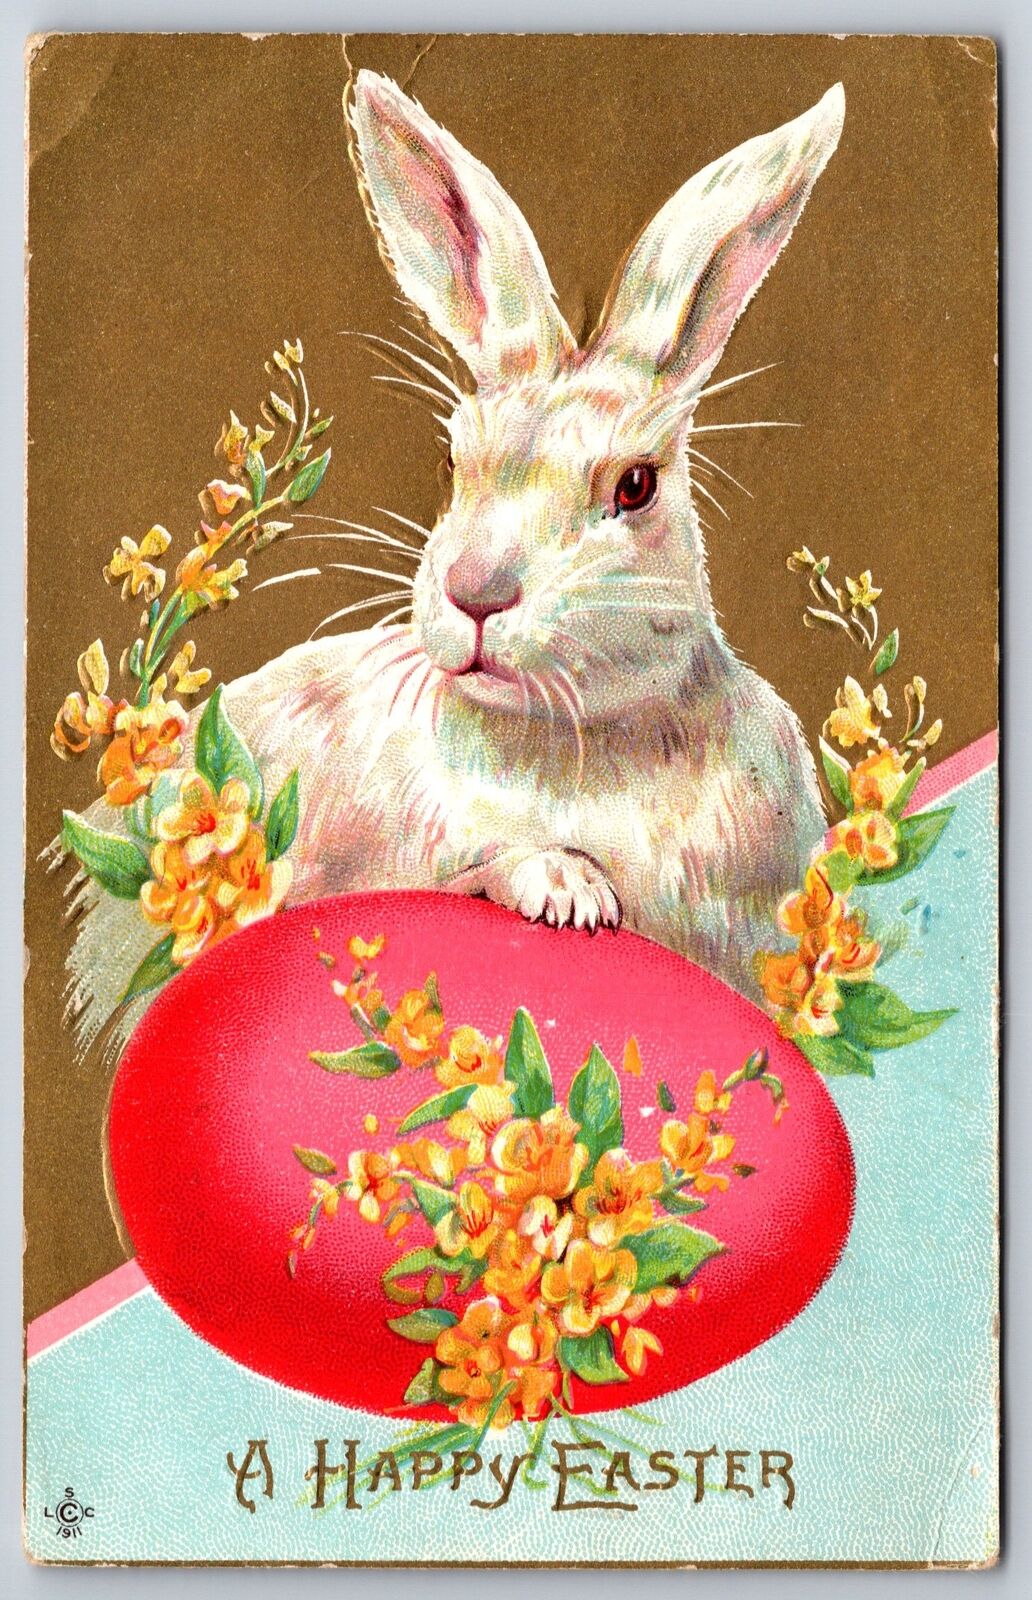 Stecher~Happy Easter~Rabbit W/ Flowers & Egg On Gold Background~Emb~Vintage PC